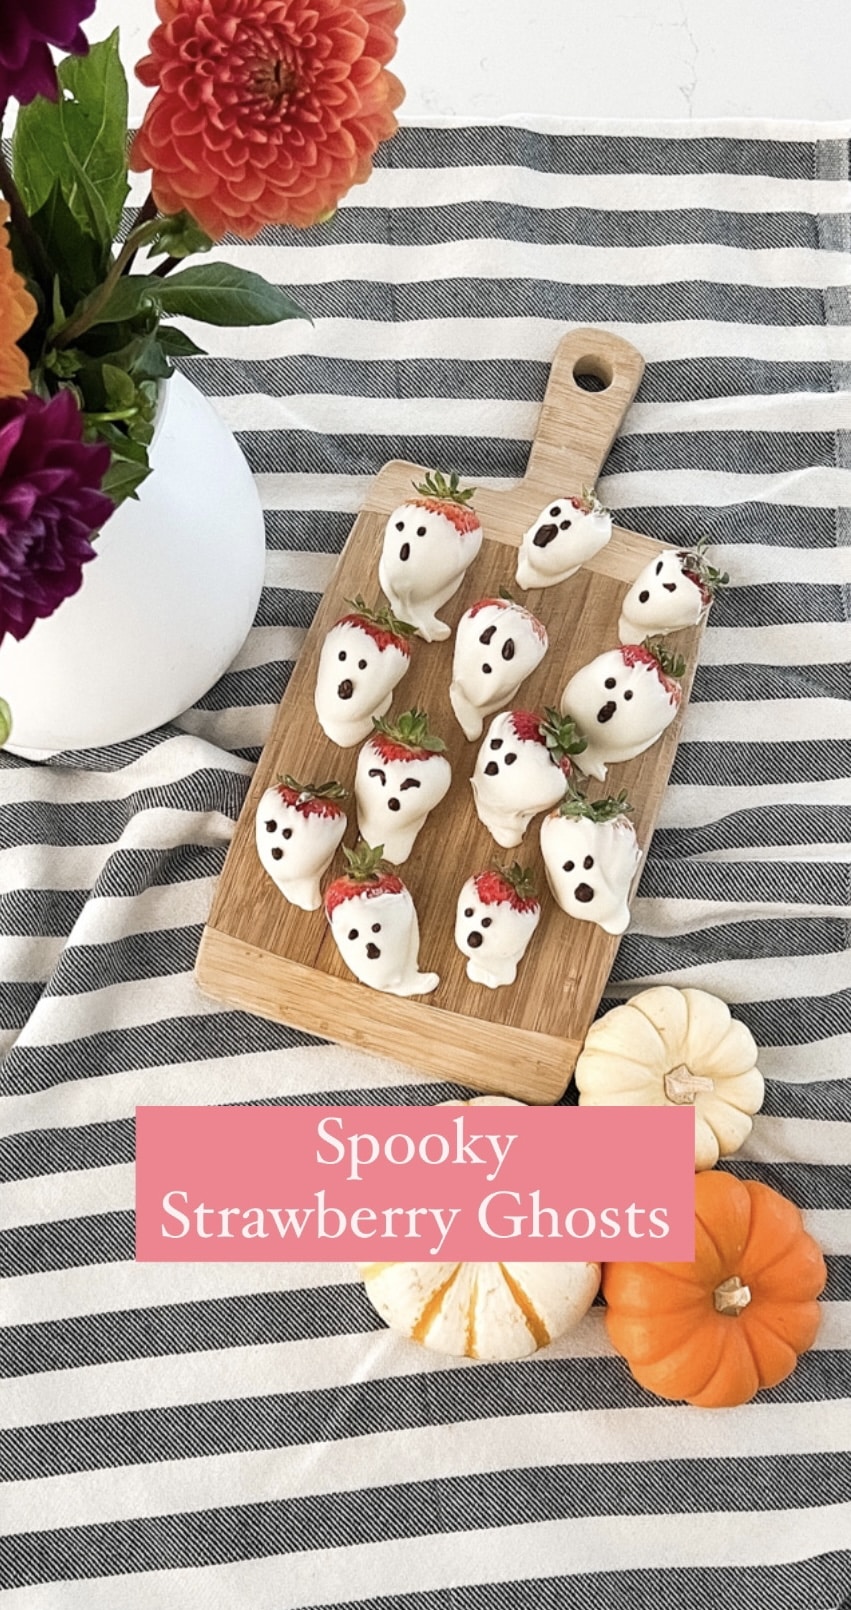 Spooky Strawberry Ghosts. A fun kids craft for Halloween! 